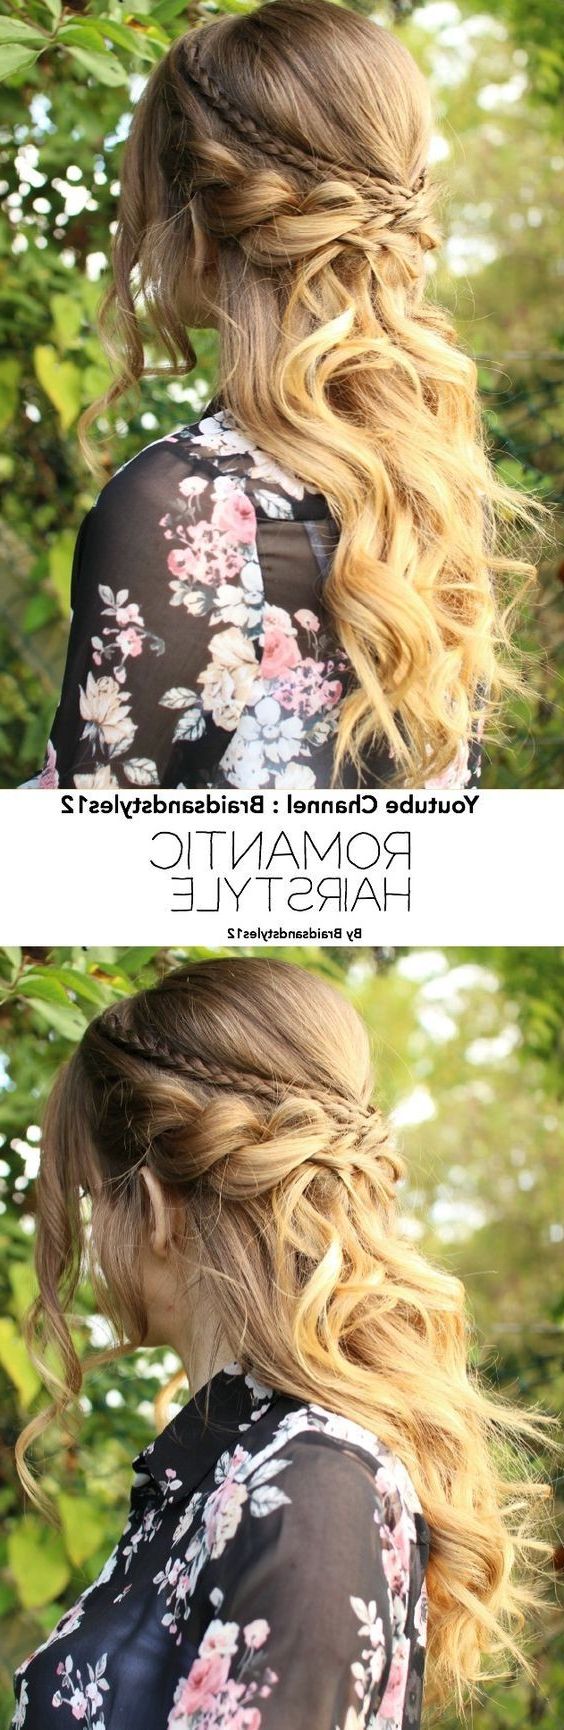 18 Elegant Hairstyles For Prom 2019 With Well Known Double Braided Prom Updos (View 18 of 20)